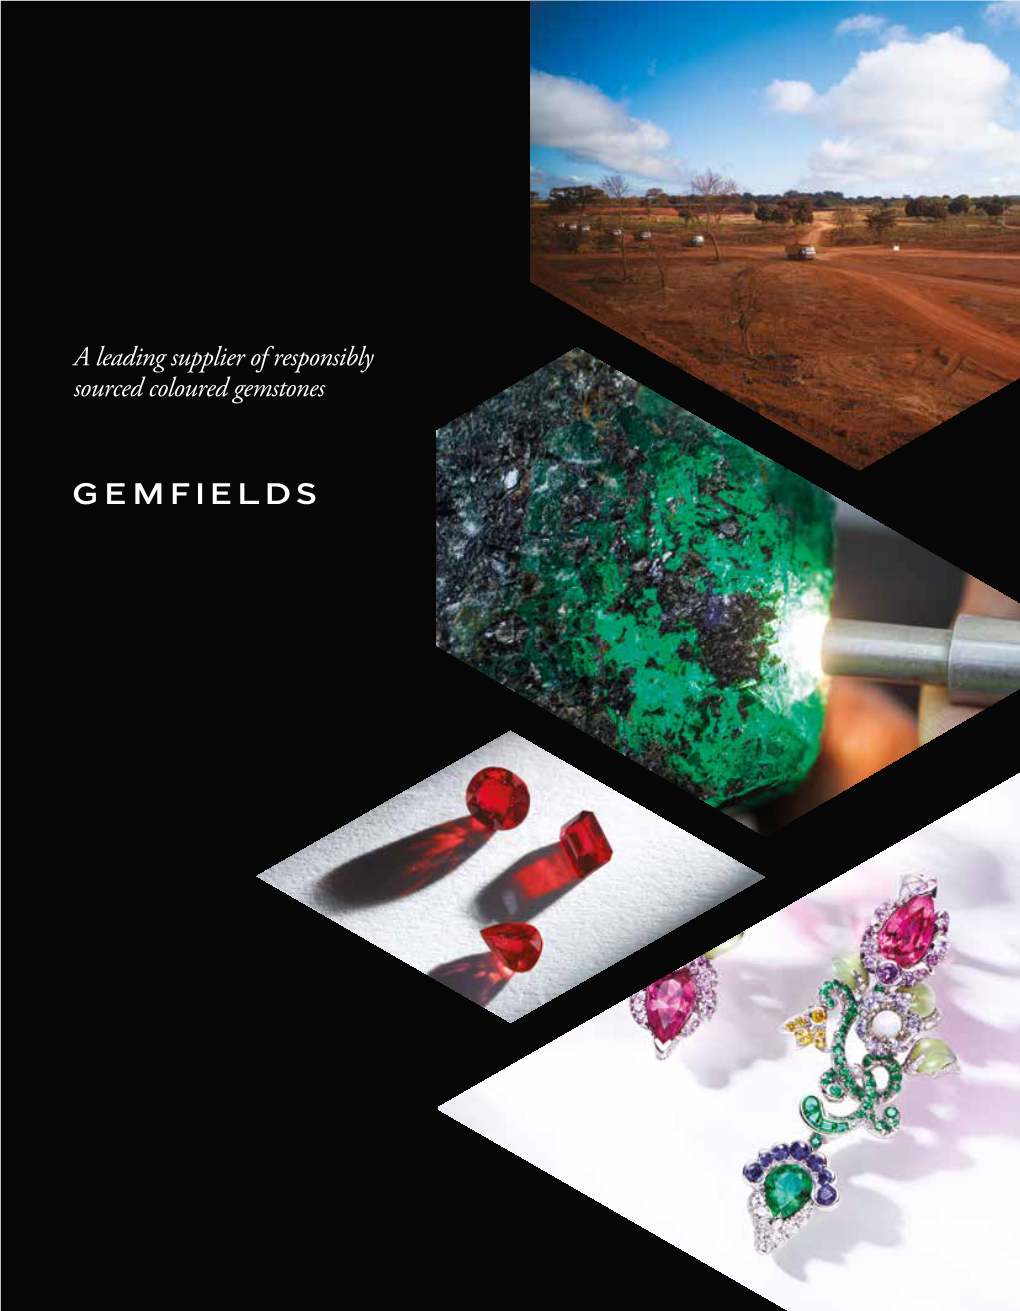 A Leading Supplier of Responsibly Sourced Coloured Gemstones